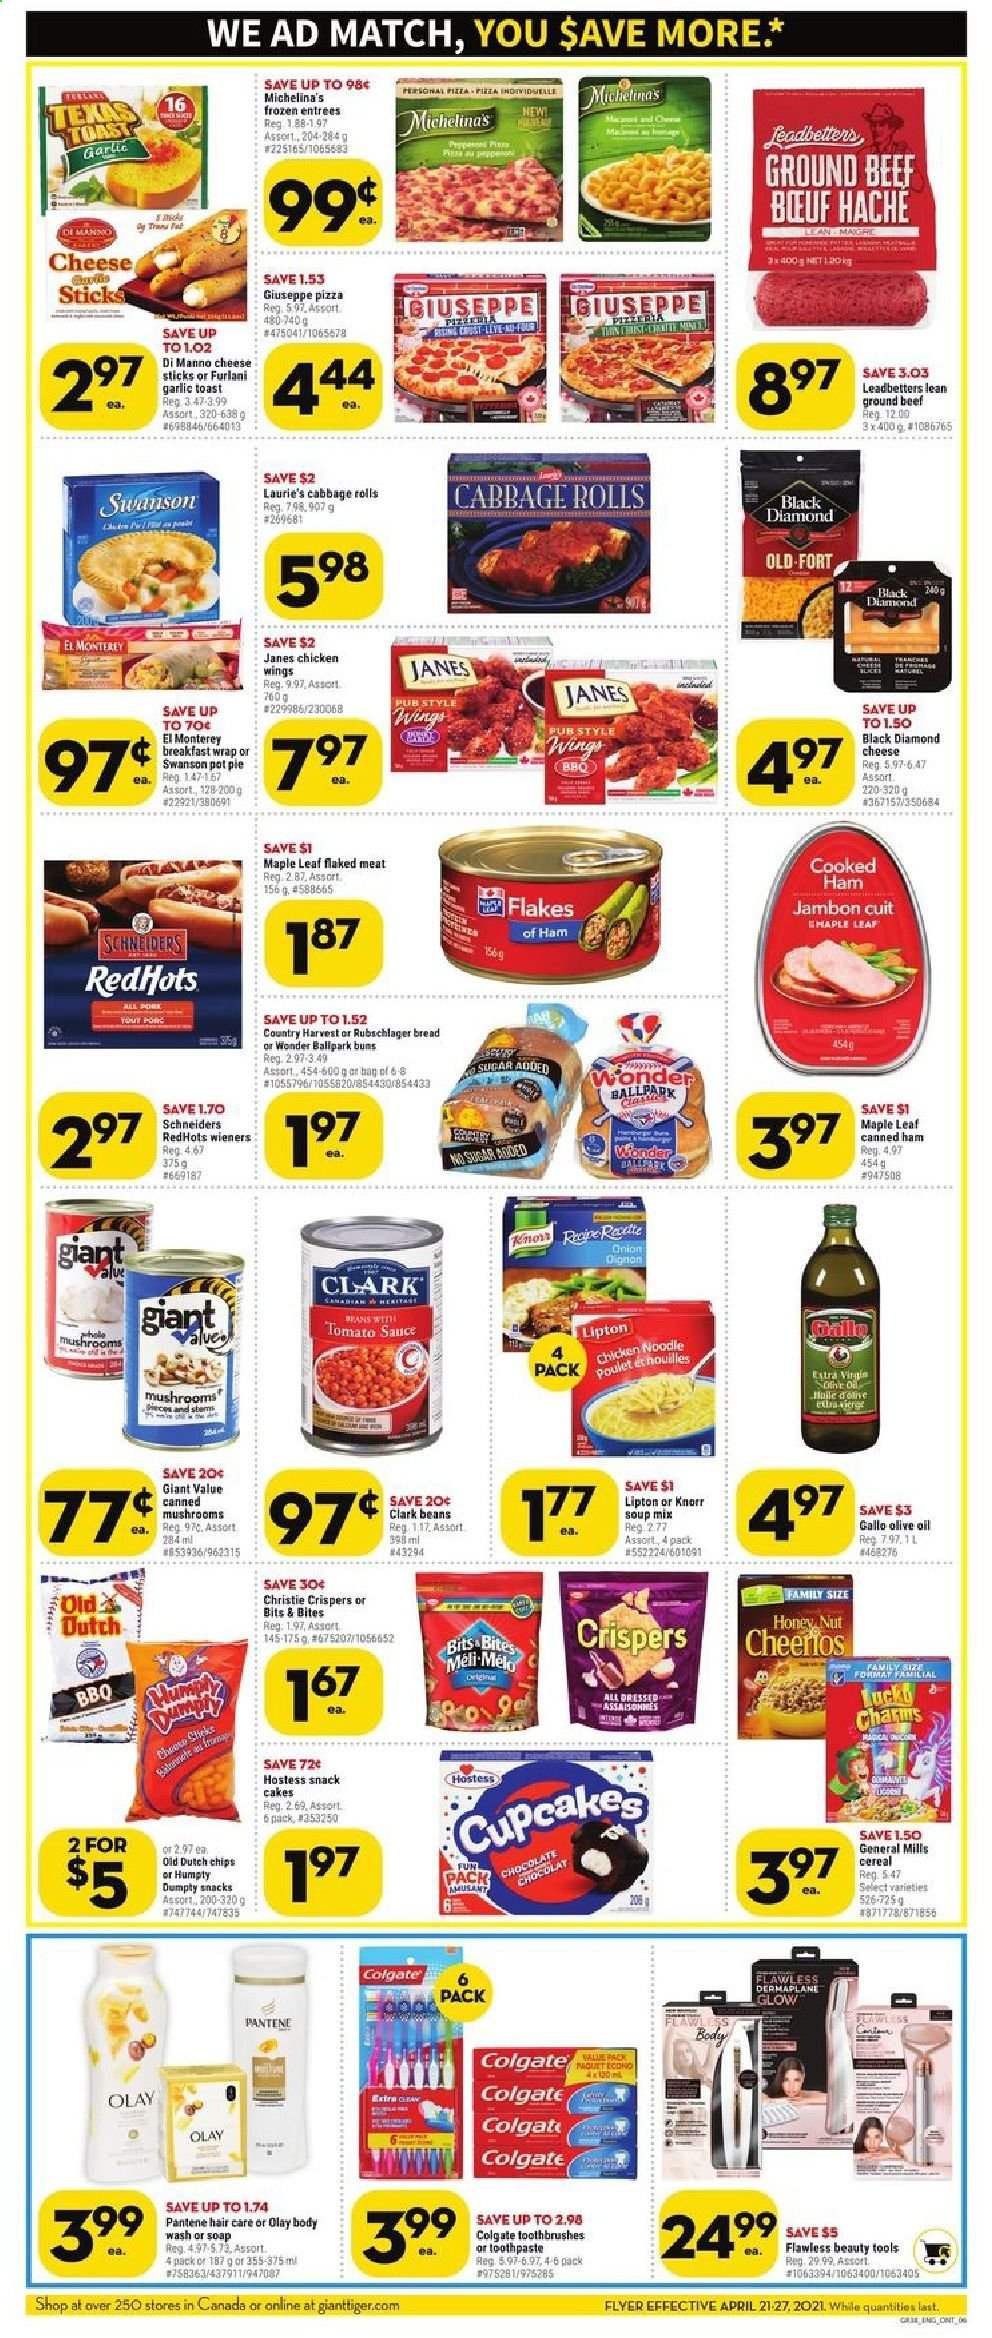 thumbnail - Giant Tiger Flyer - April 21, 2021 - April 27, 2021 - Sales products - bread, cake, pie, buns, cupcake, pot pie, beans, cabbage, pizza, soup mix, soup, sauce, cooked ham, ham, Country Harvest, cheese sticks, chocolate, snack, tomato sauce, canned mushrooms, cereals, Cheerios, olive oil, oil, beef meat, ground beef, body wash, soap, toothpaste, Olay, pot, dress, Knorr, Pantene. Page 2.